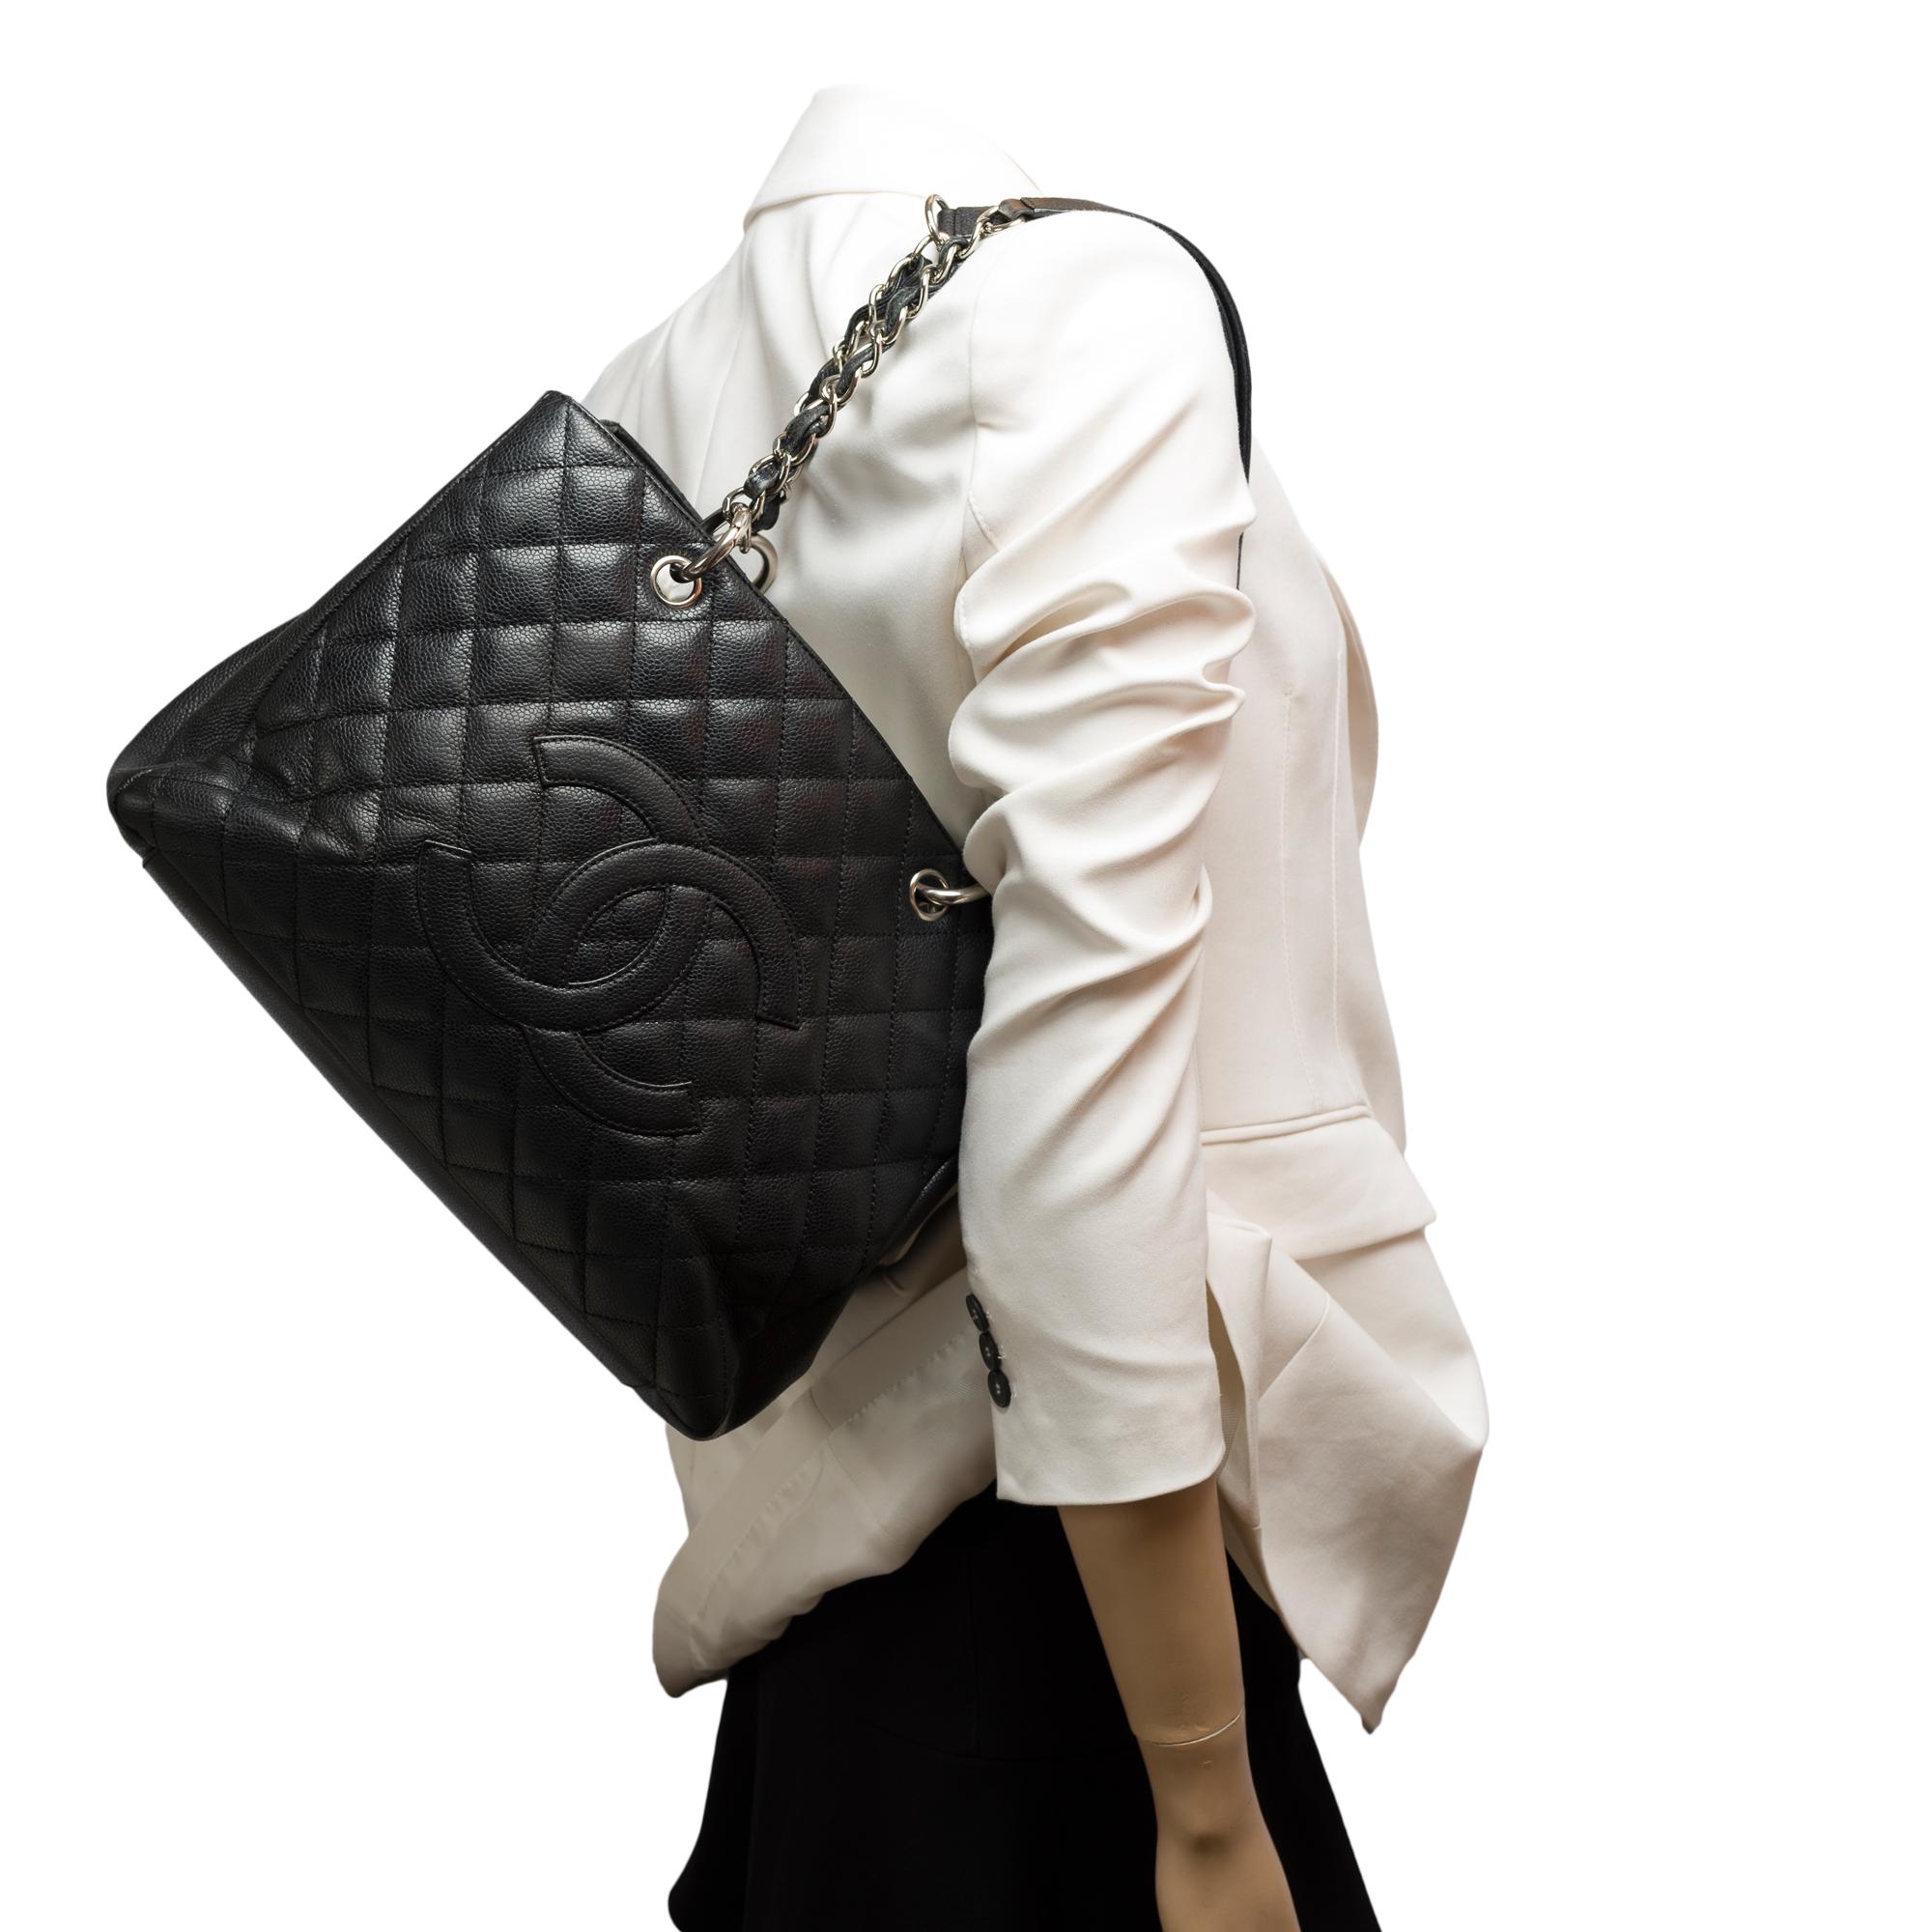  Chanel Grand Shopping Tote bag (GST) in black Caviar quilted leather, SHW For Sale 8